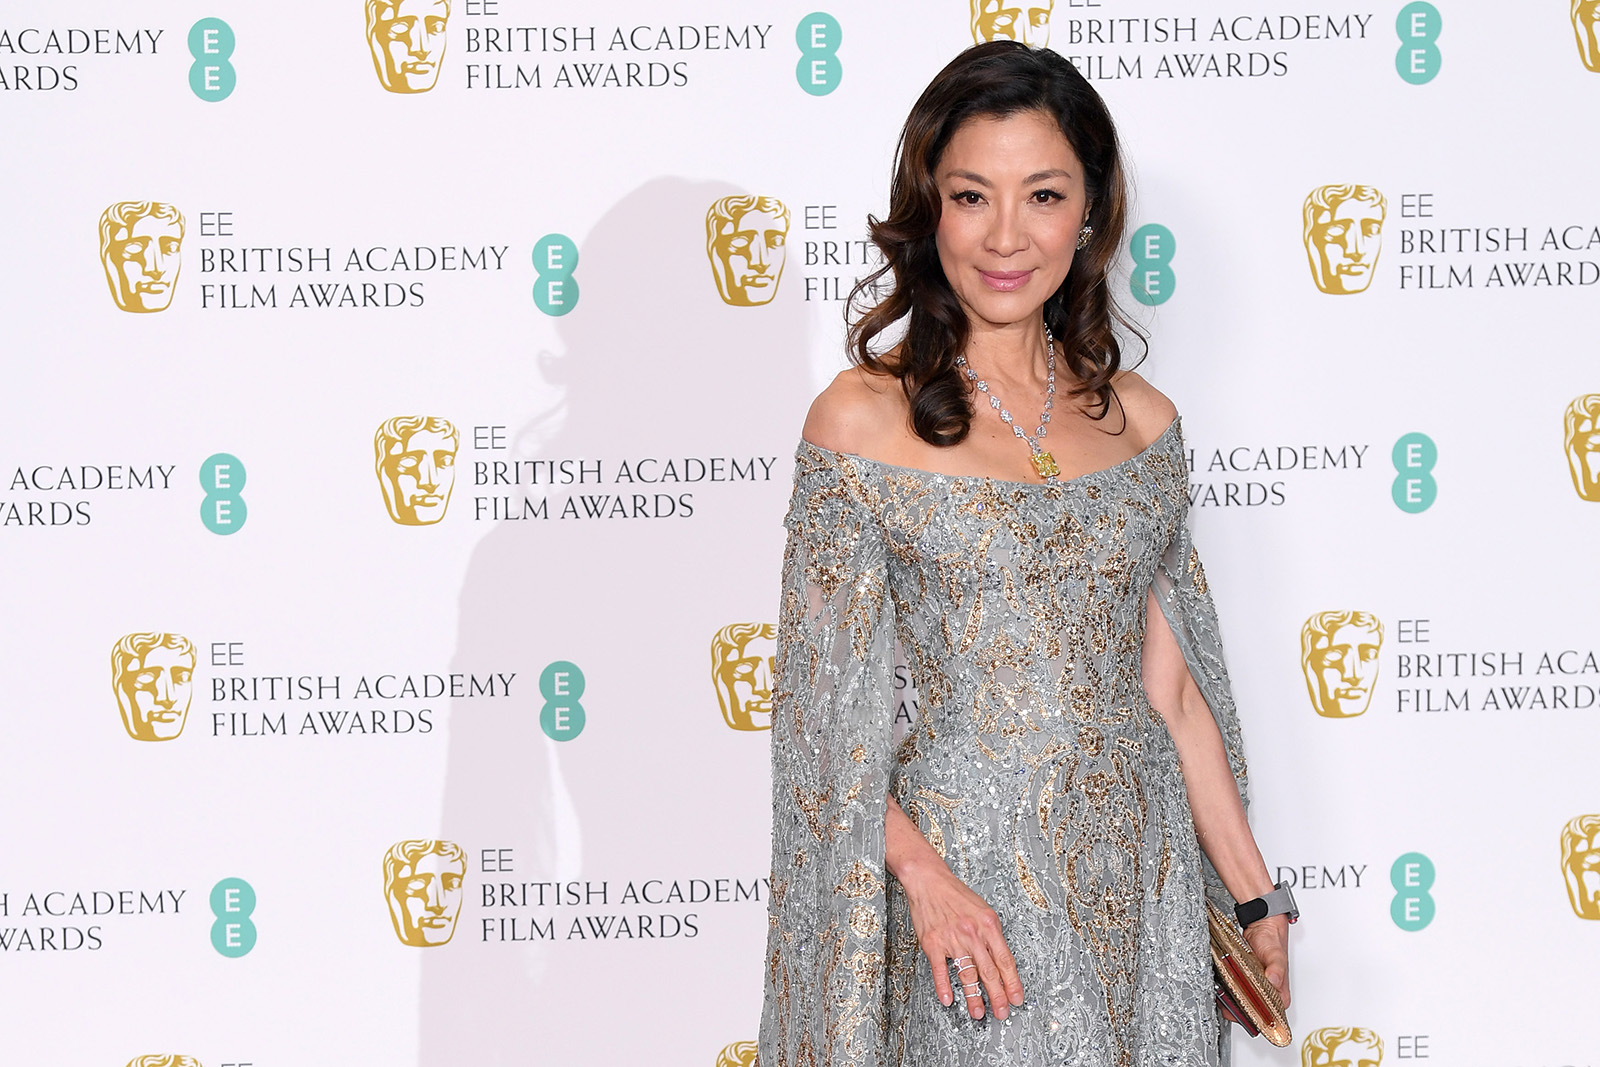 Michelle Yeoh at the 2019 BAFTA awards wearing Moussaieff necklace with 74ct natural fancy intense yellow diamond, and 80ct colourless diamonds, and earrings with 17ct natural fancy intense yellow diamonds, and 7 carats of colourless diamonds 